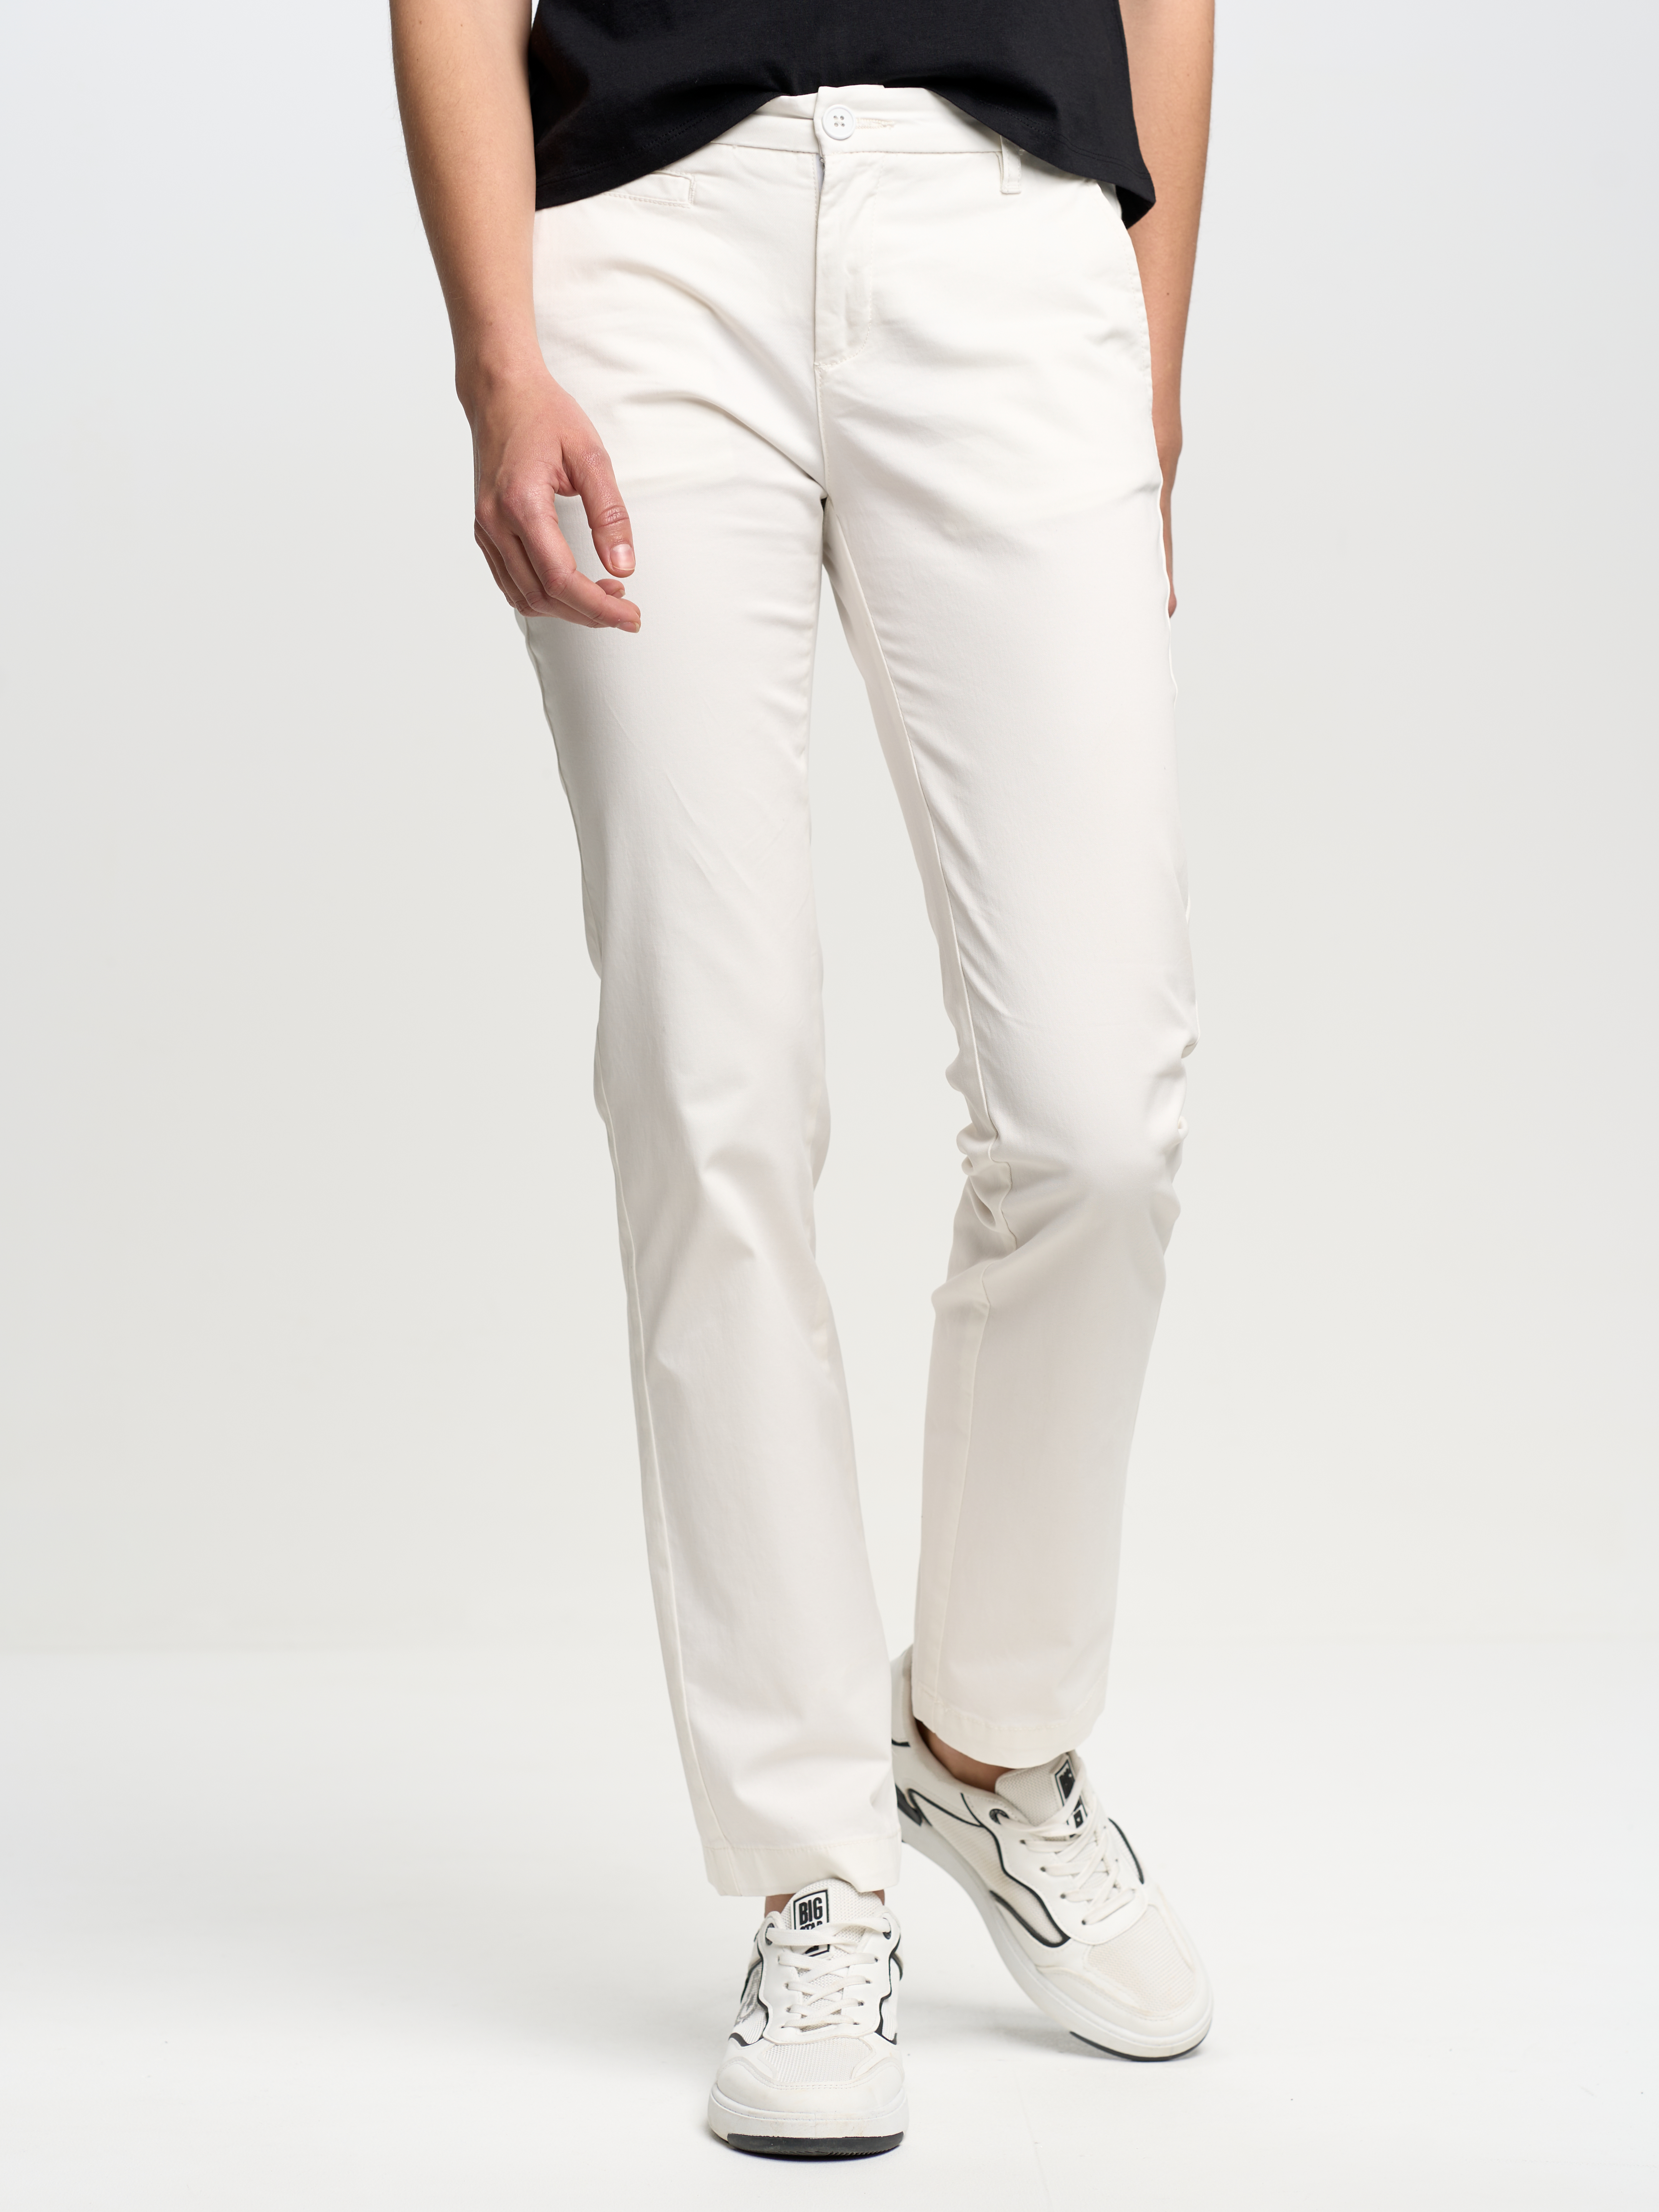 Big Star Woman's Chinos Trousers 190069 Cream 101